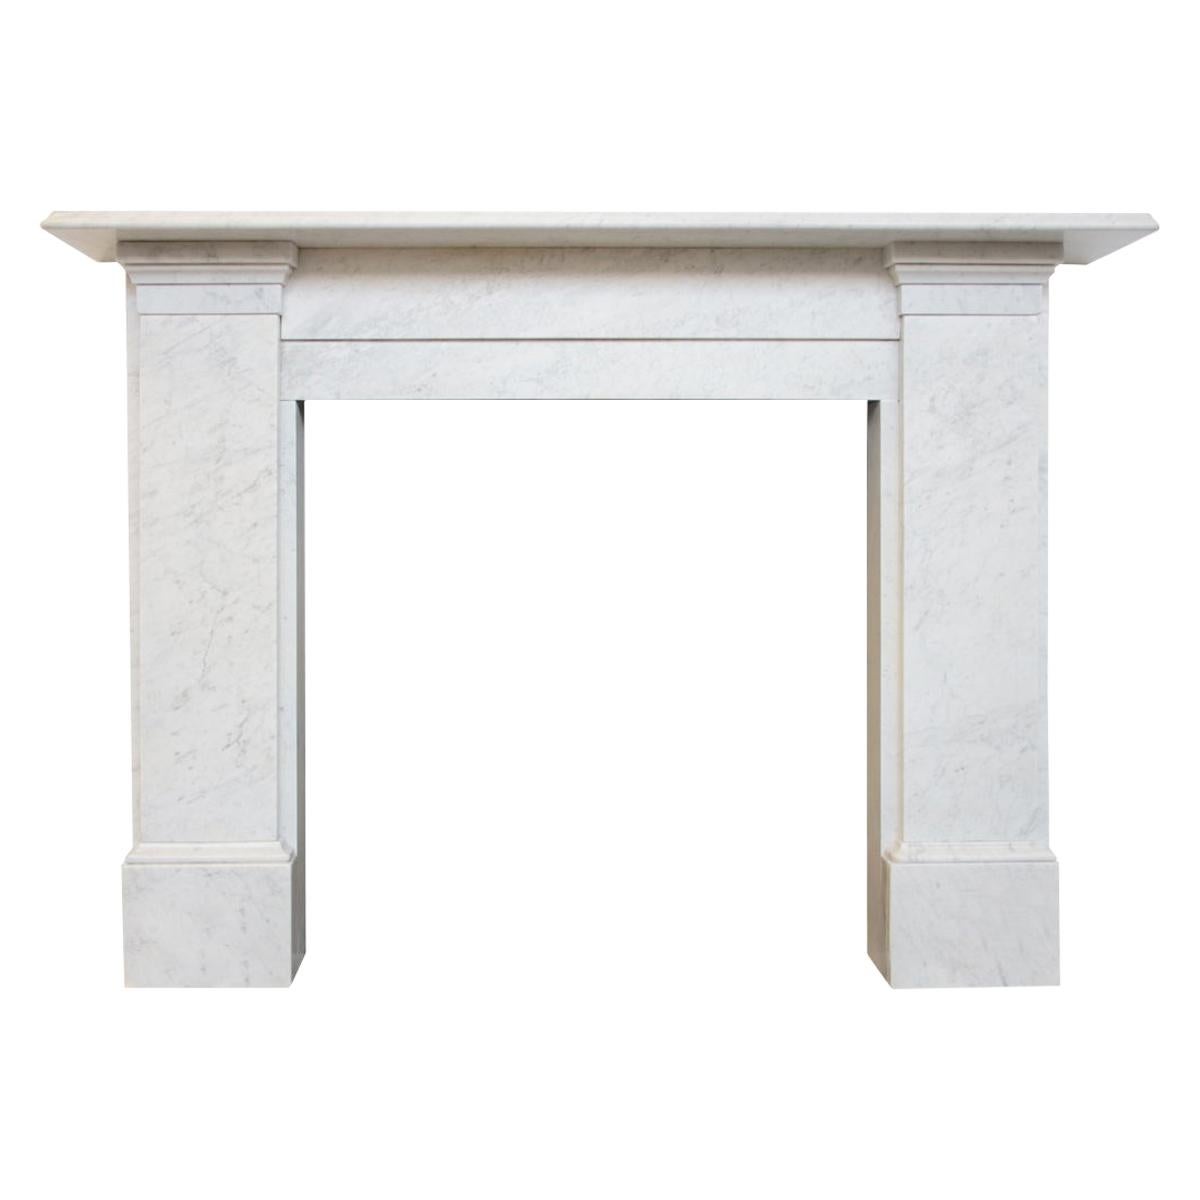 Large and Imposing Victorian Carrara Marble Fireplace Surround